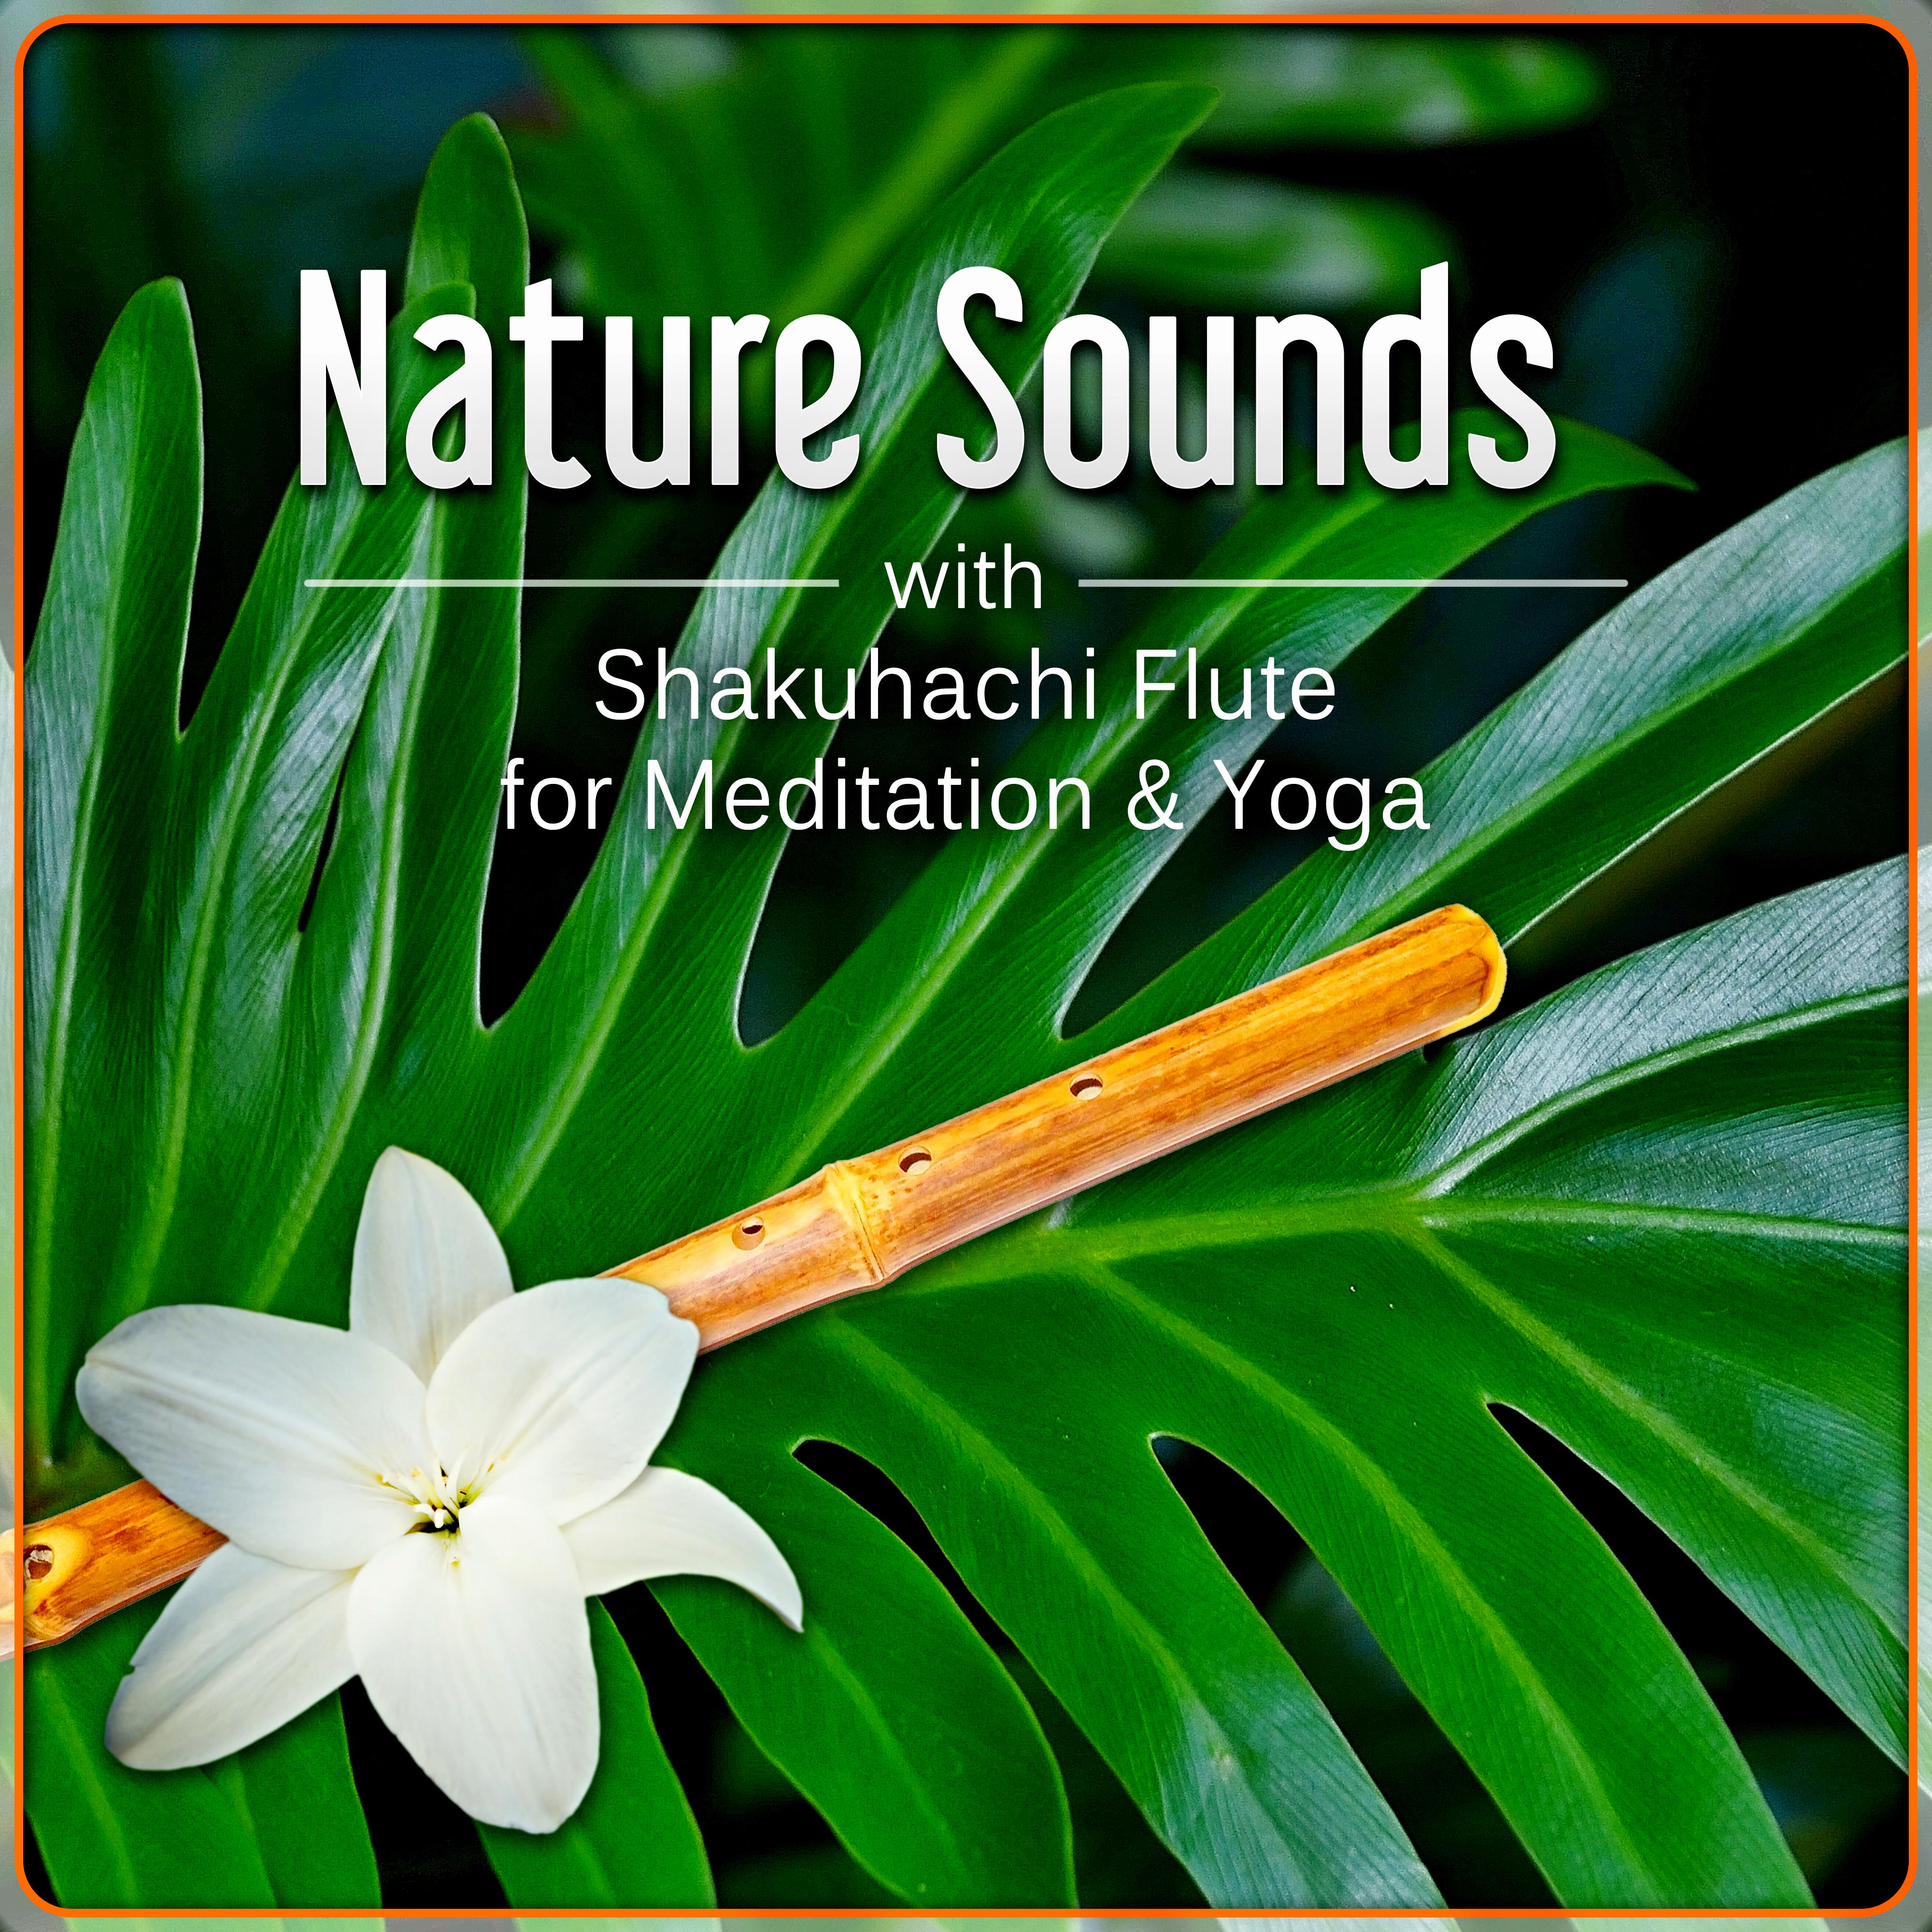 Nature Sounds with Shakuhachi Flute for Meditation